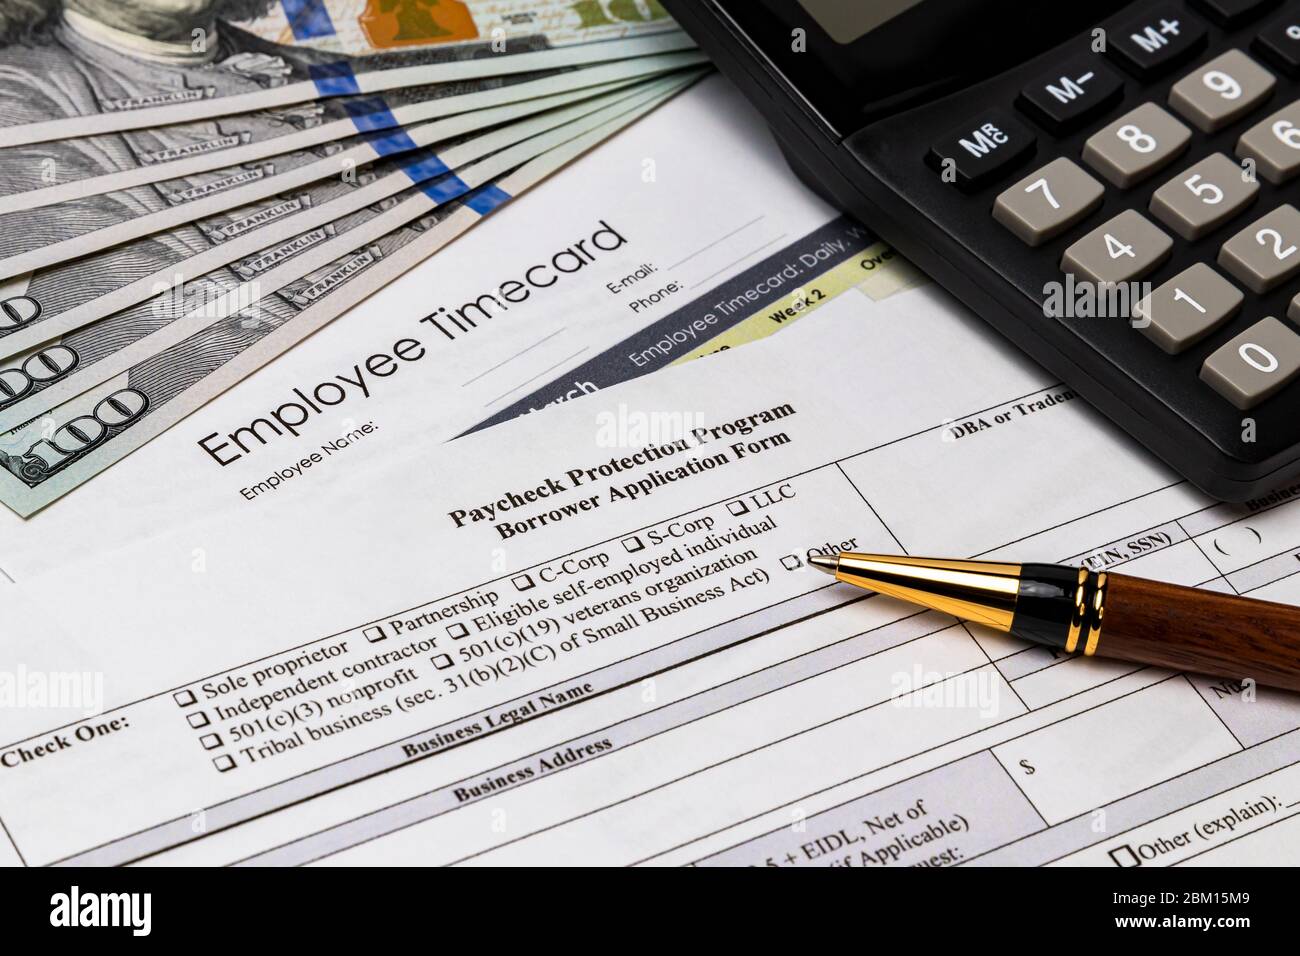 Paycheck protection program application for small business payroll support from federal government stimulus bill during Covid-19 coronavirus pandemic Stock Photo